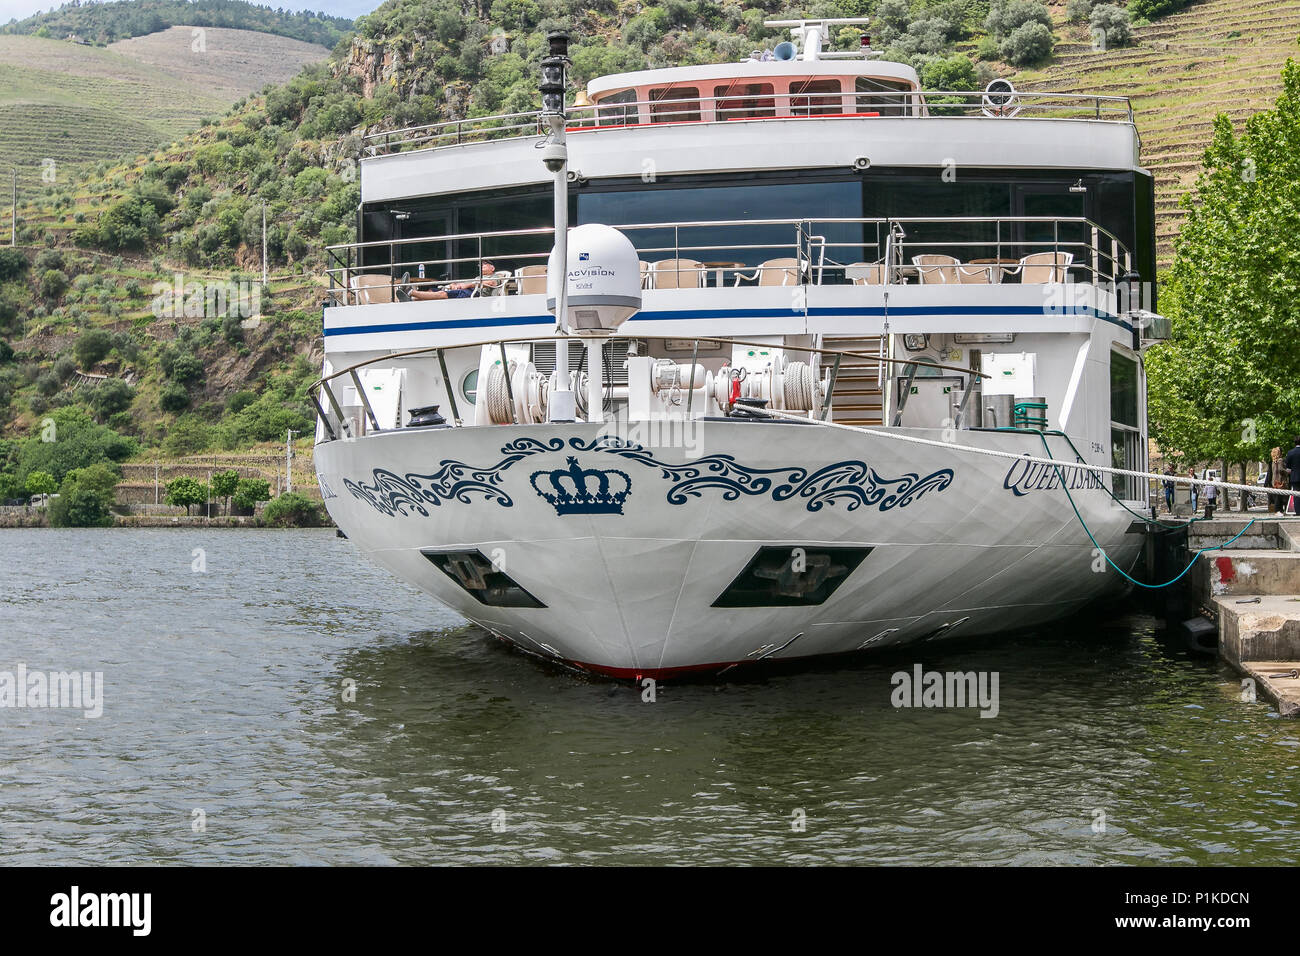 Queen Isabel cruise ship docked at Pinhao. Douro Valley, Portugal. Stock Photo